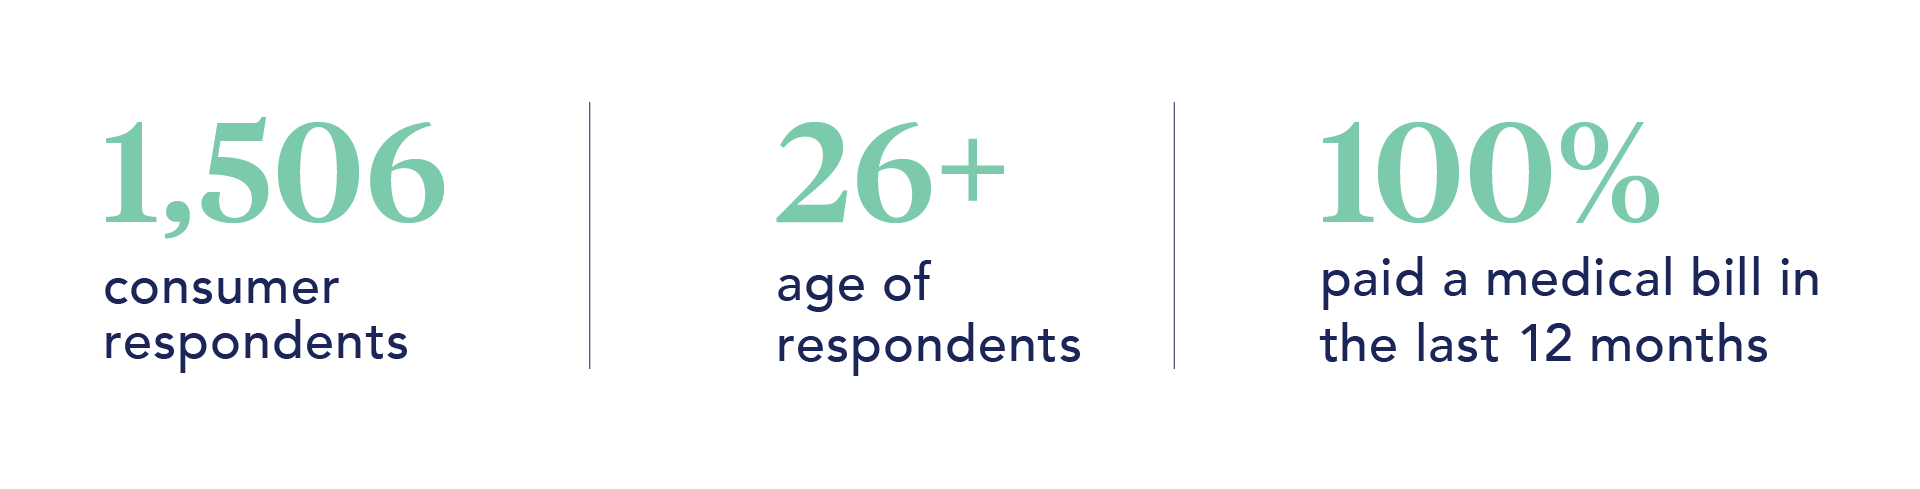 Statistics: 1,506 consumer respondents, 26+ age of respondents, 100% paid a medical bill in the last 12 months